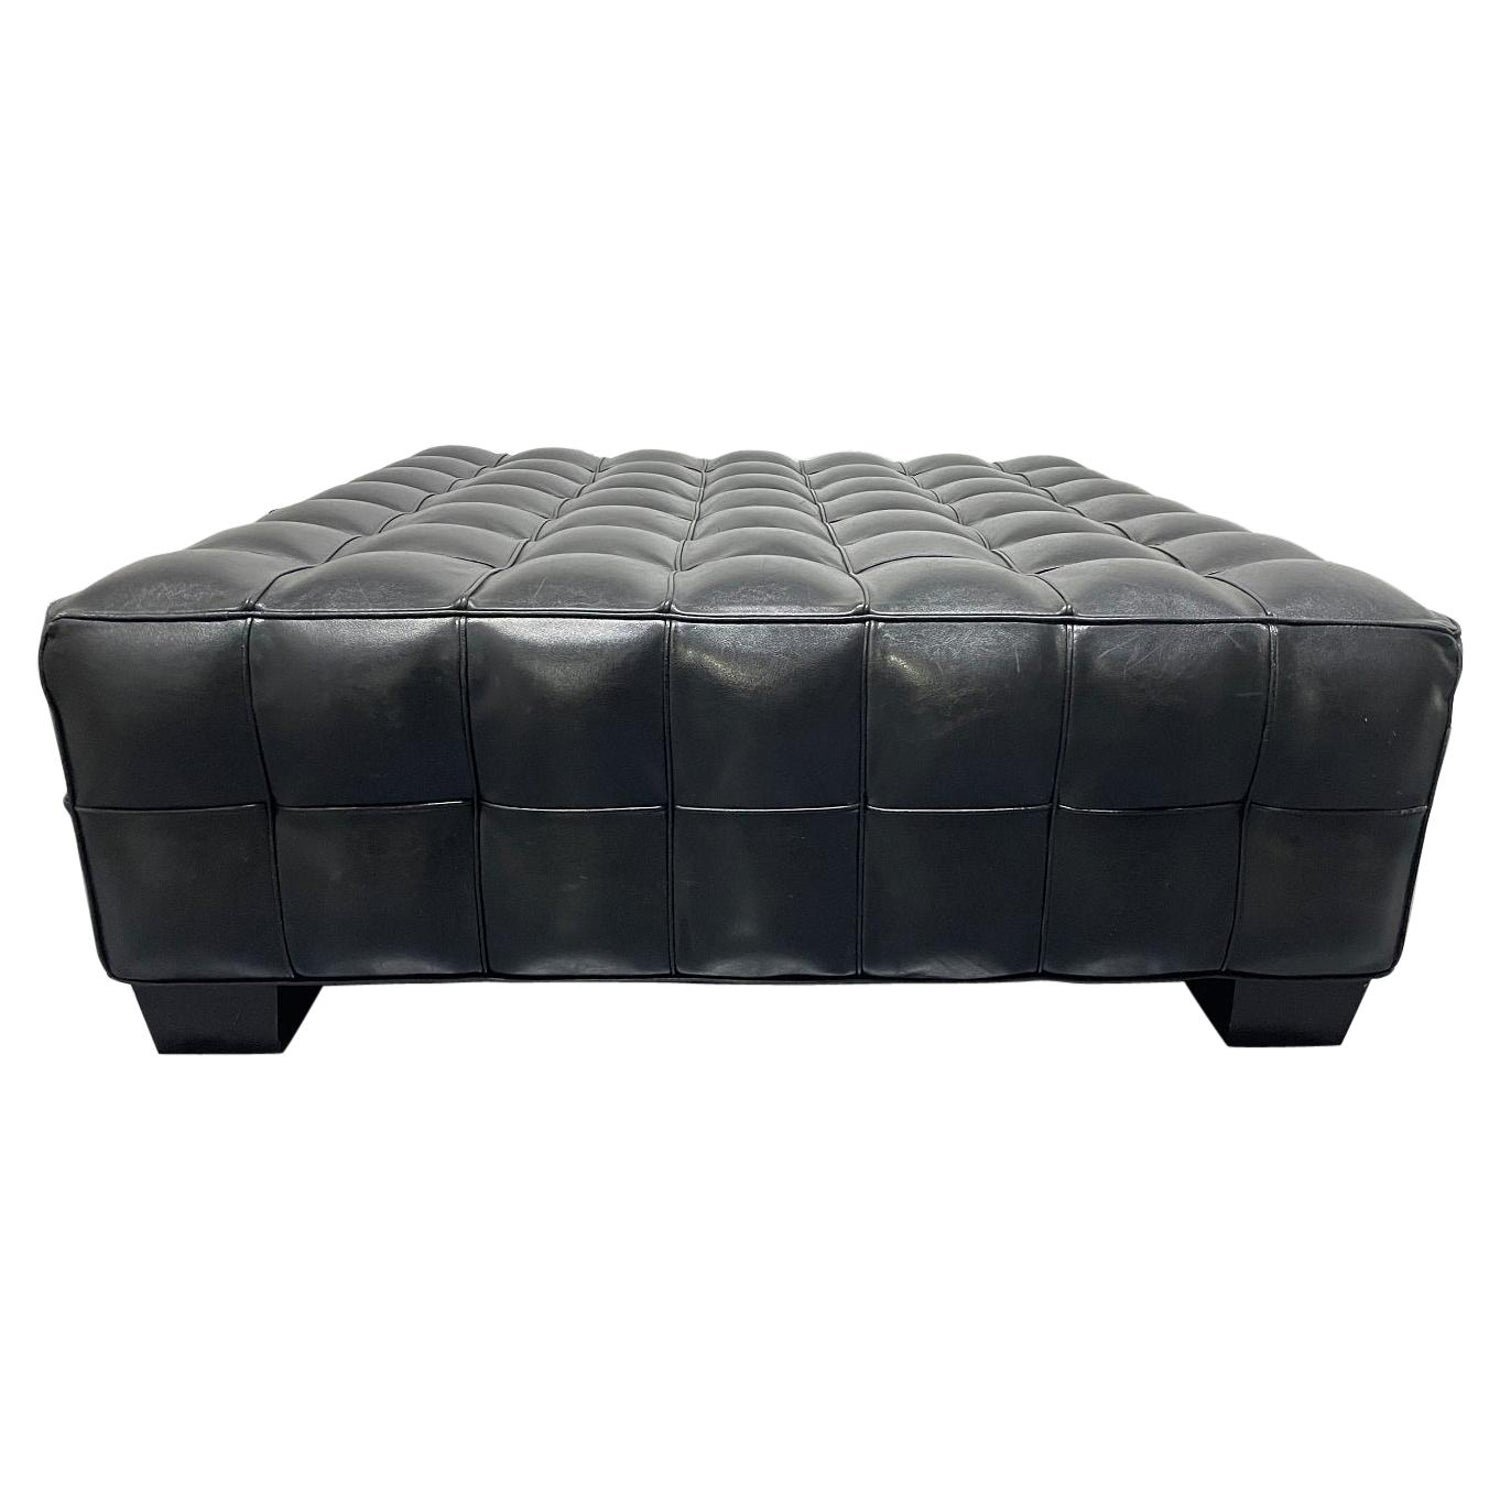 Leather Tufted Ottoman Style Of, Black Leather Tufted Ottoman